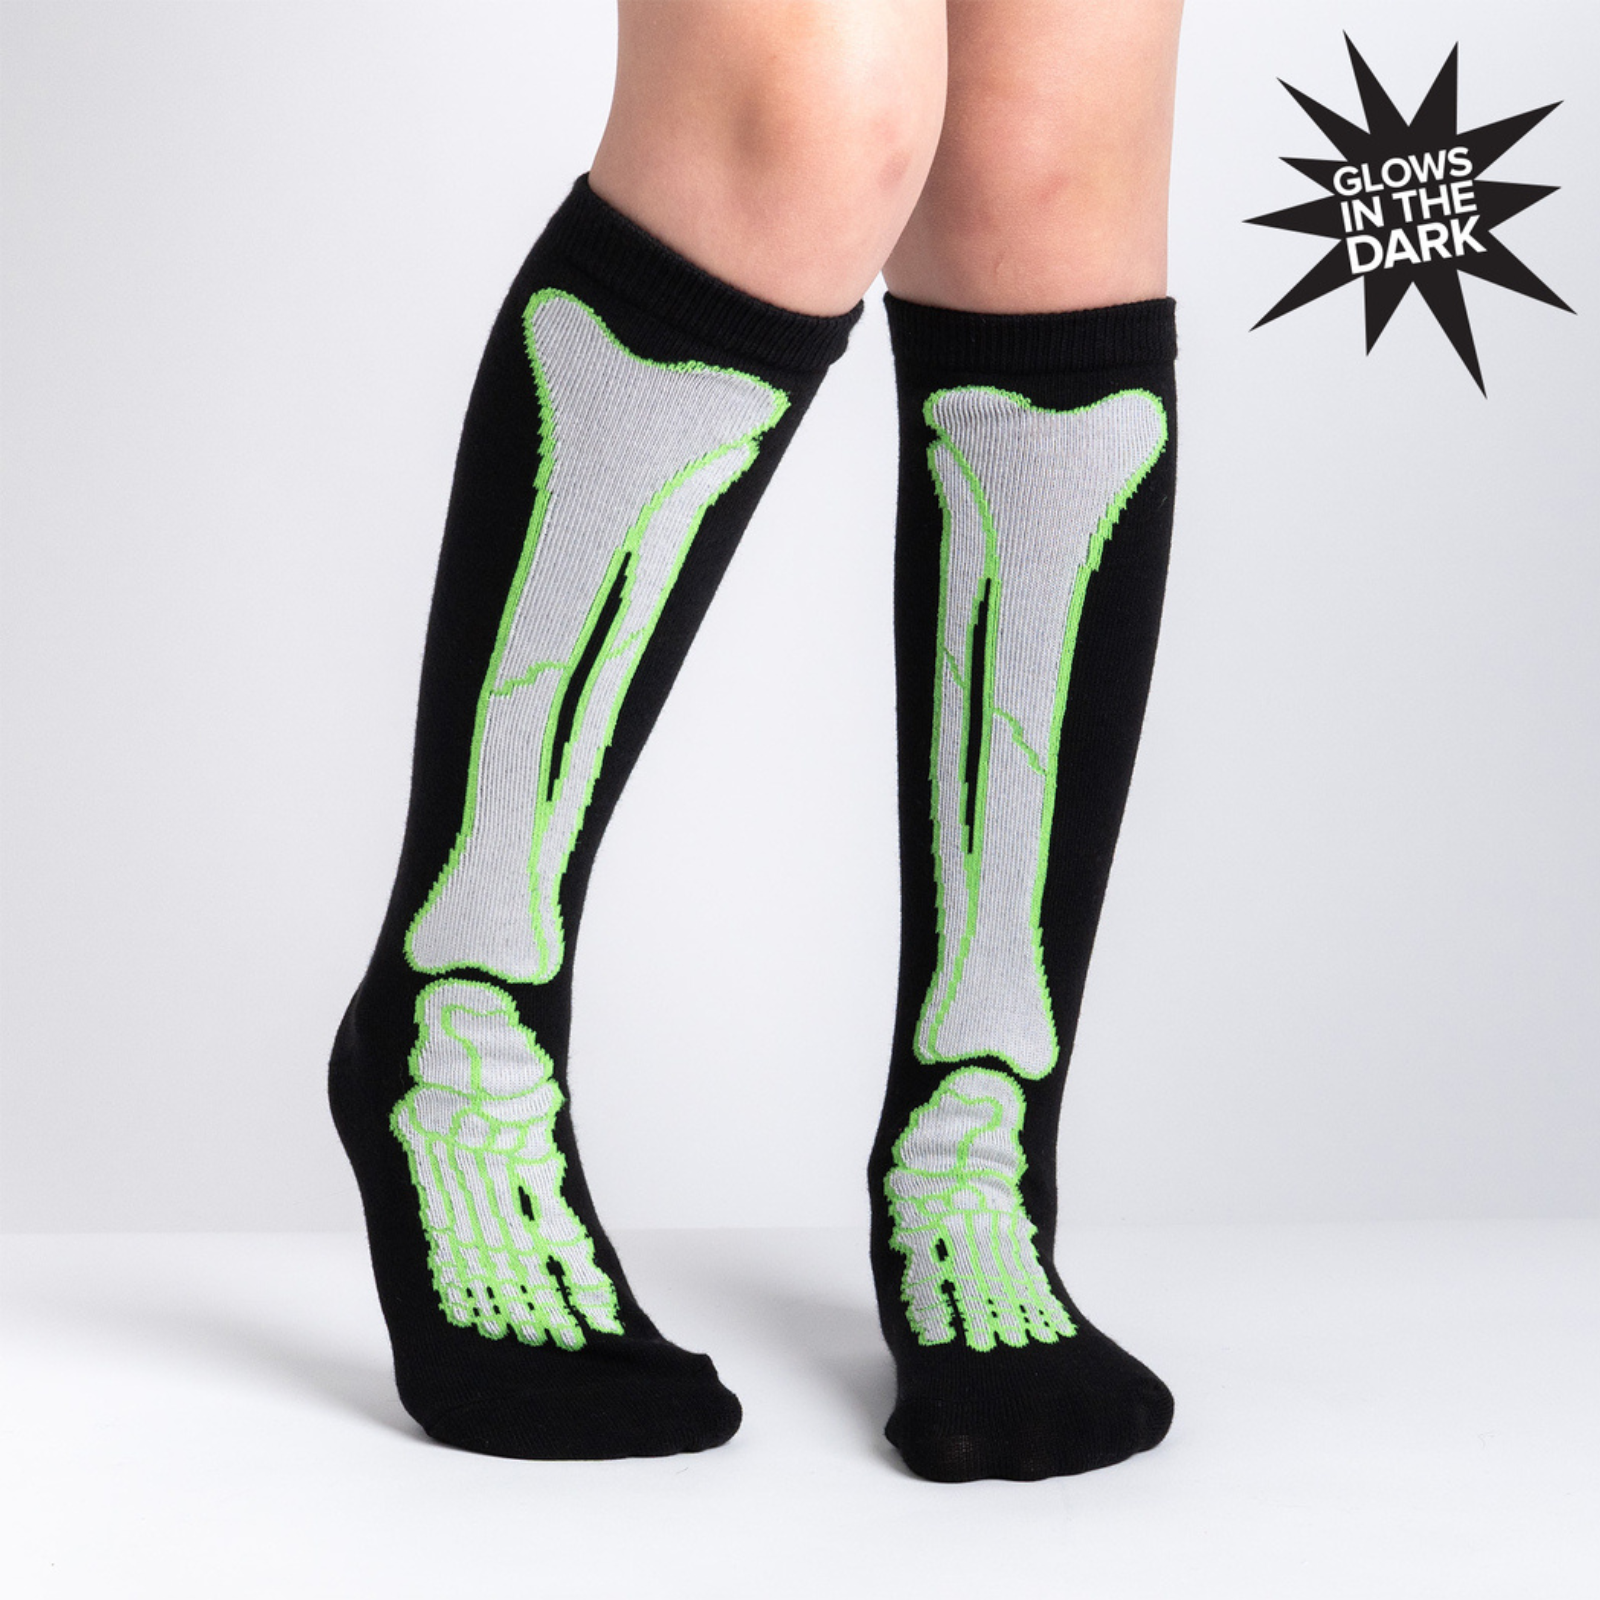 Sock It To Me It's Going Tibia Good Day kids' sock (GLOW IN THE DARK!) featuring a black knee high sock with outline of tibia bones worn by model from front